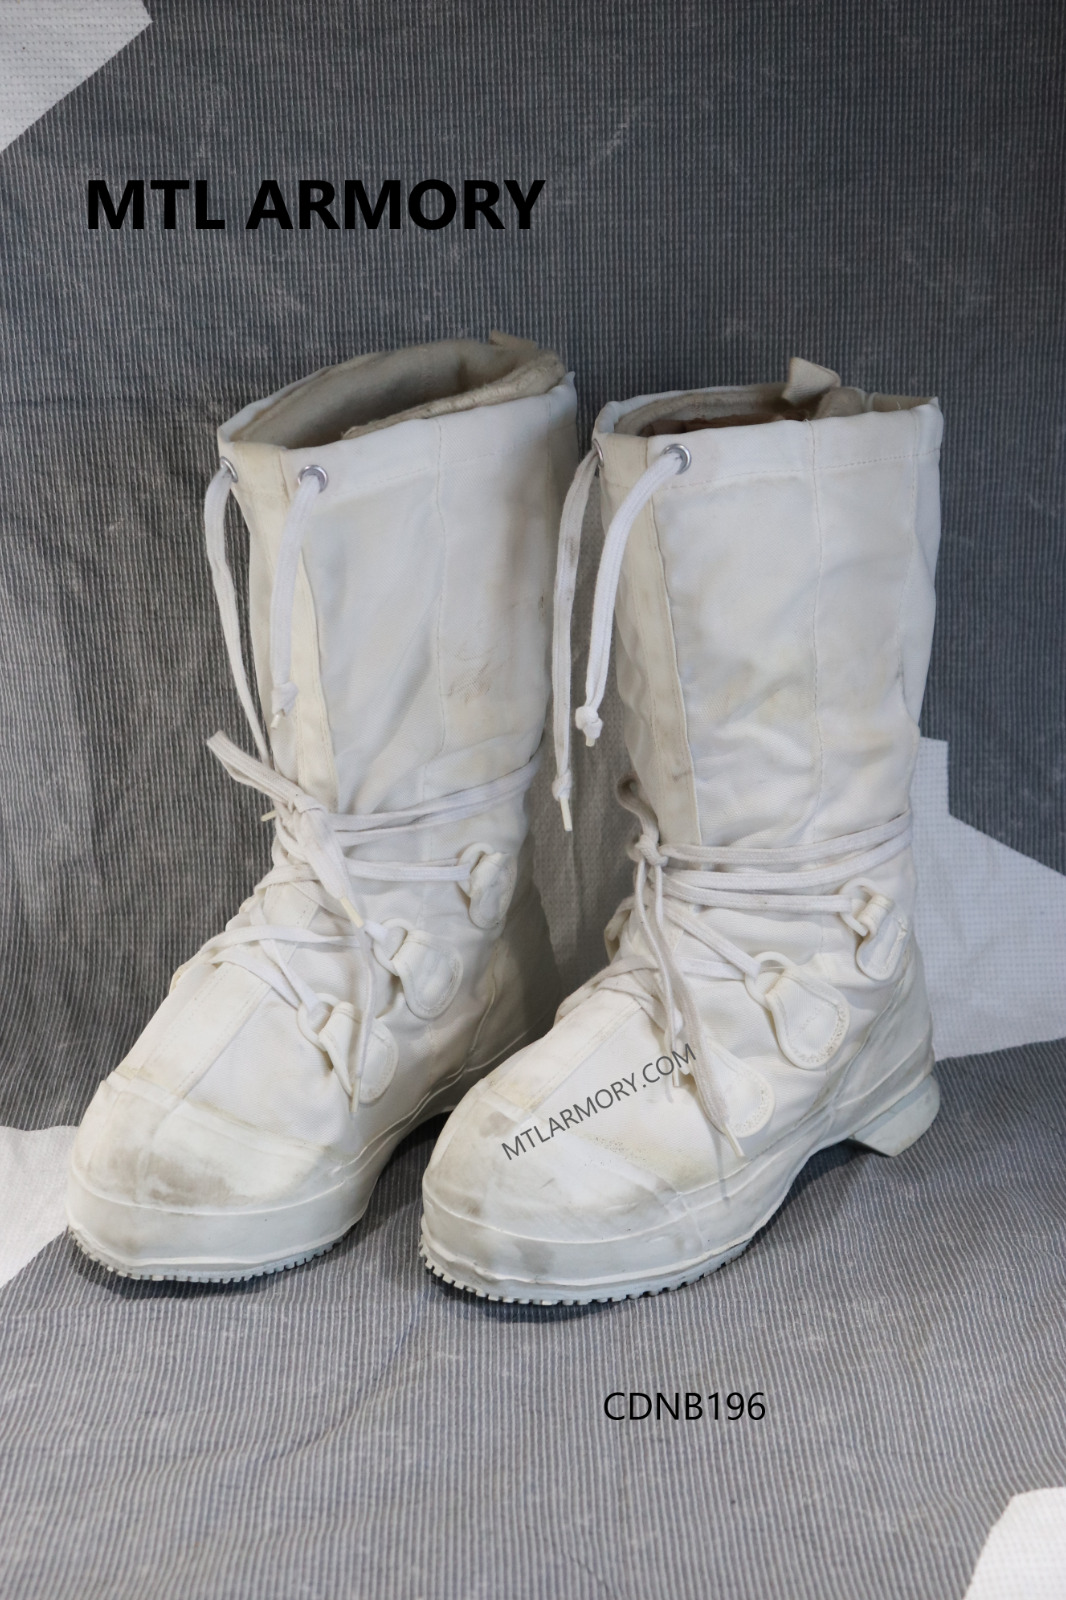 CANADIAN FORCES ISSUED MUKLUKS SIZE 6 M CANADA ARMY  ( MTL ARMORY )